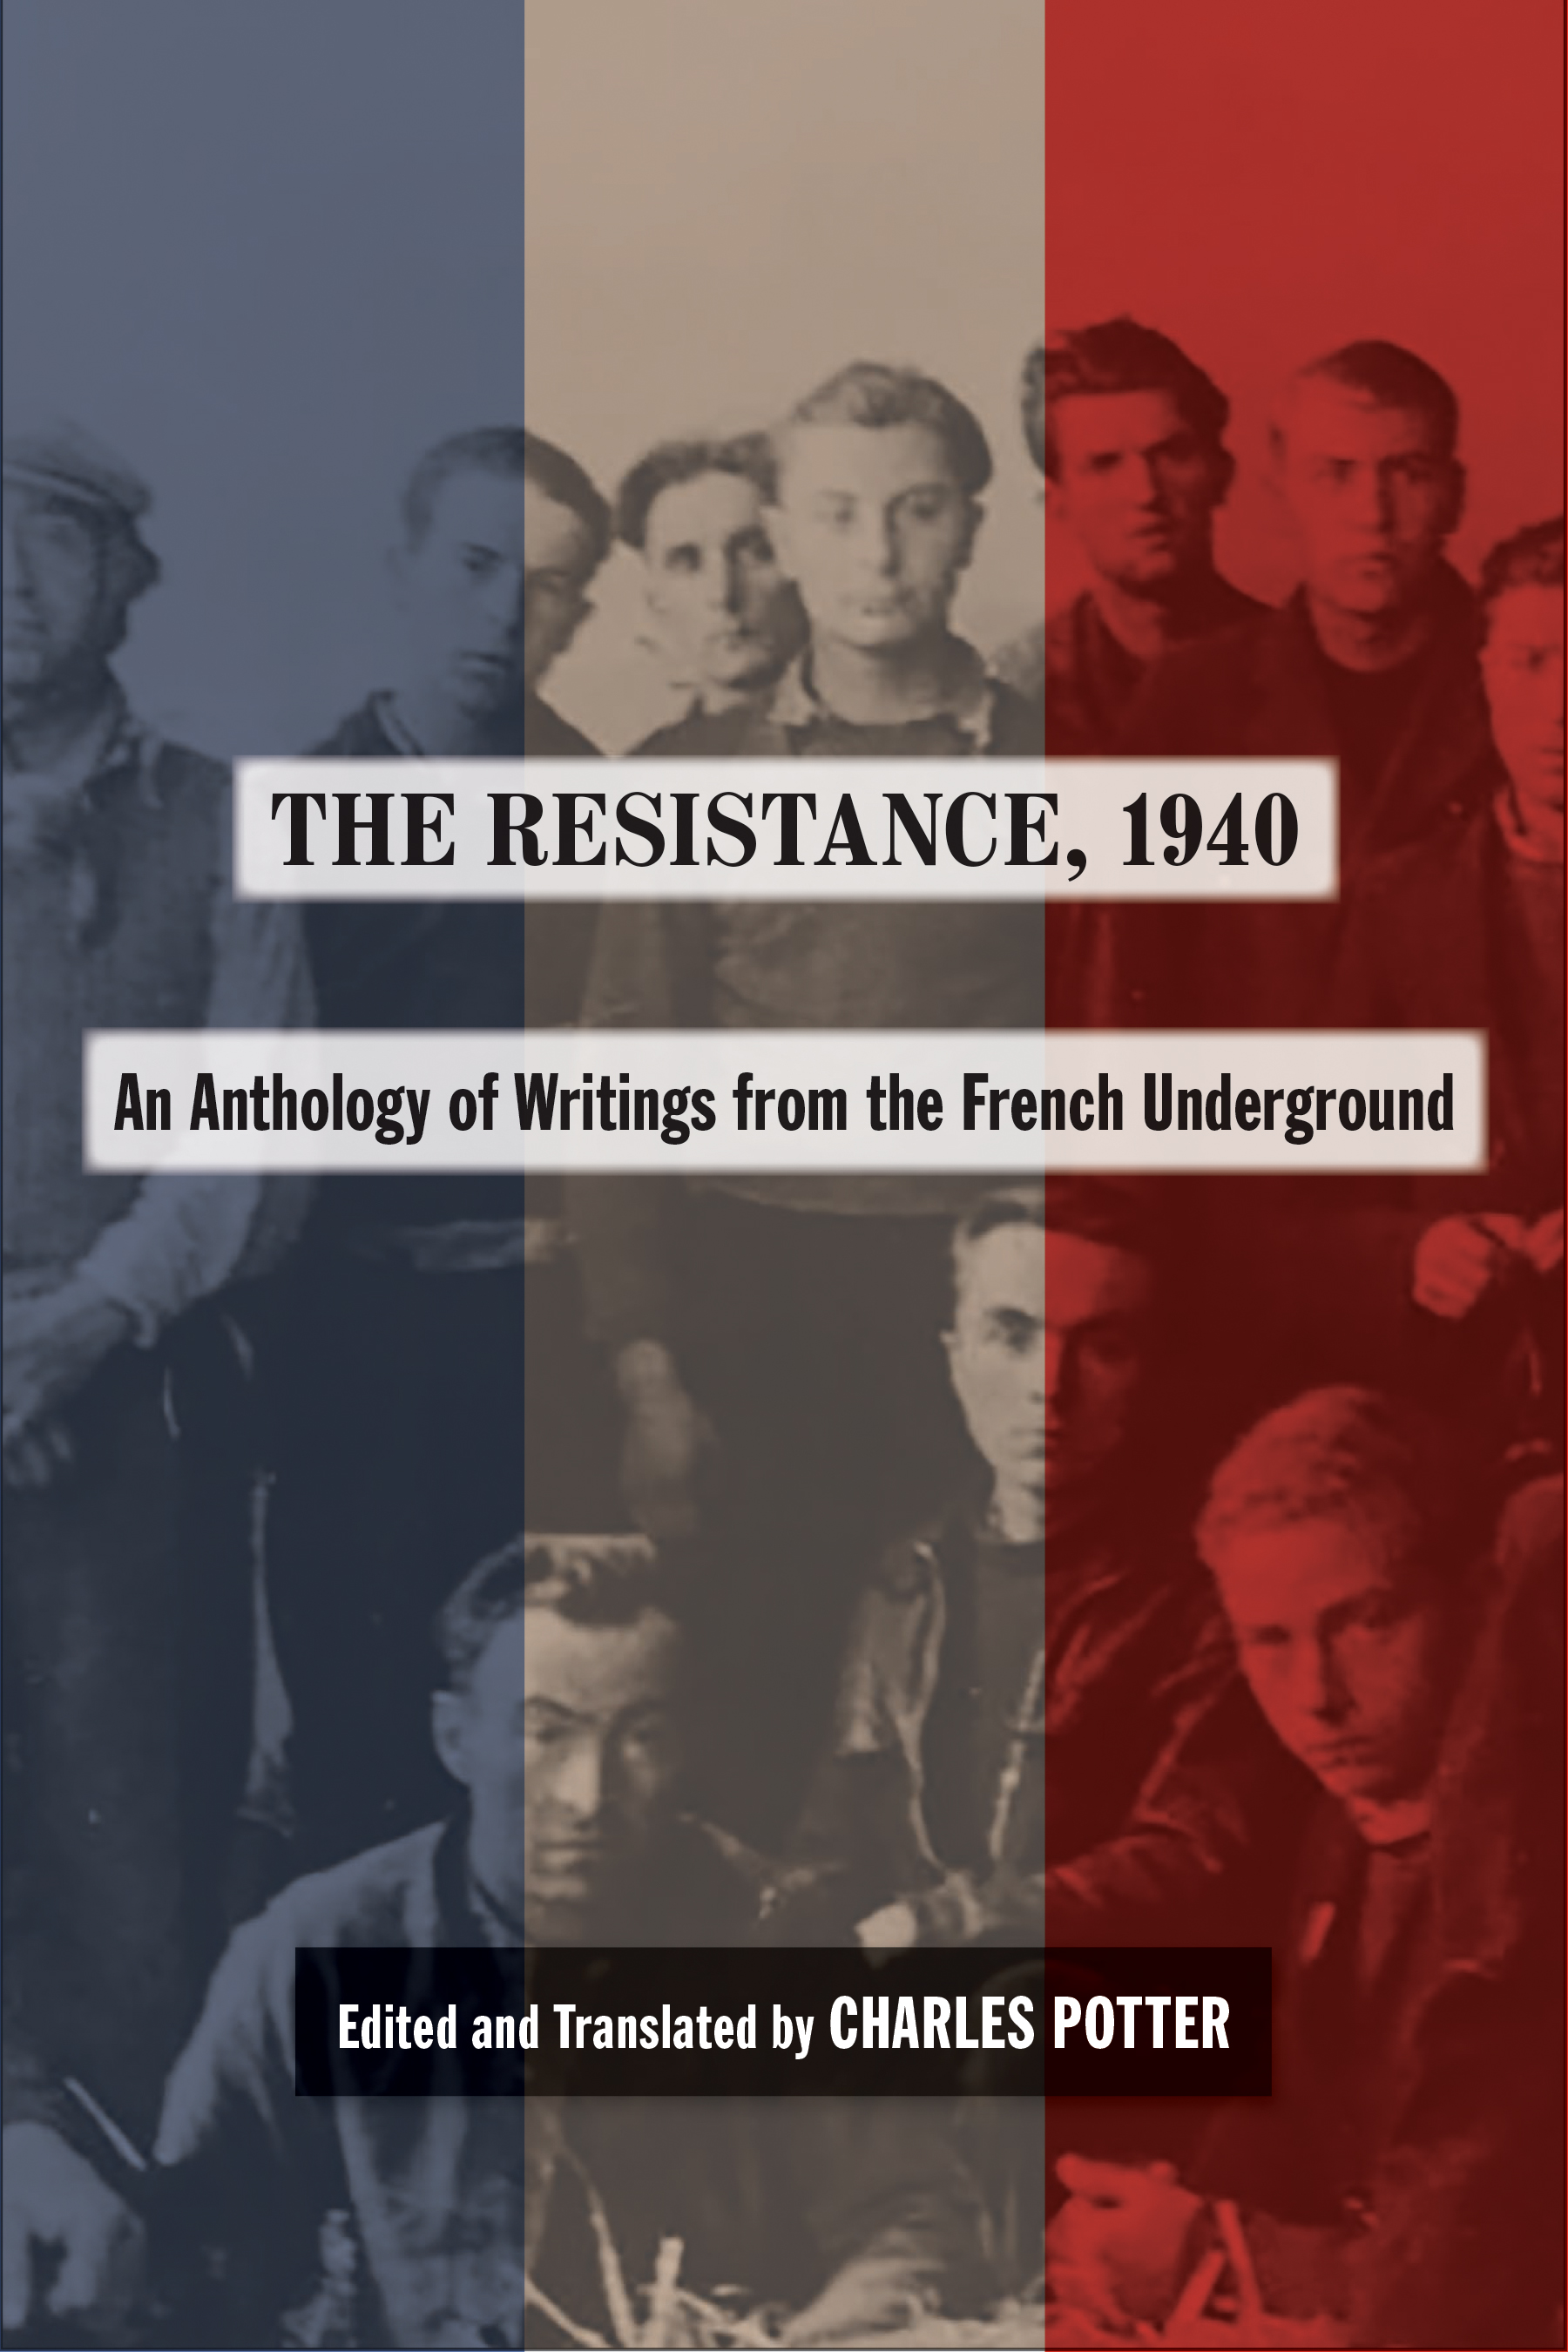 [The French Resistance] 